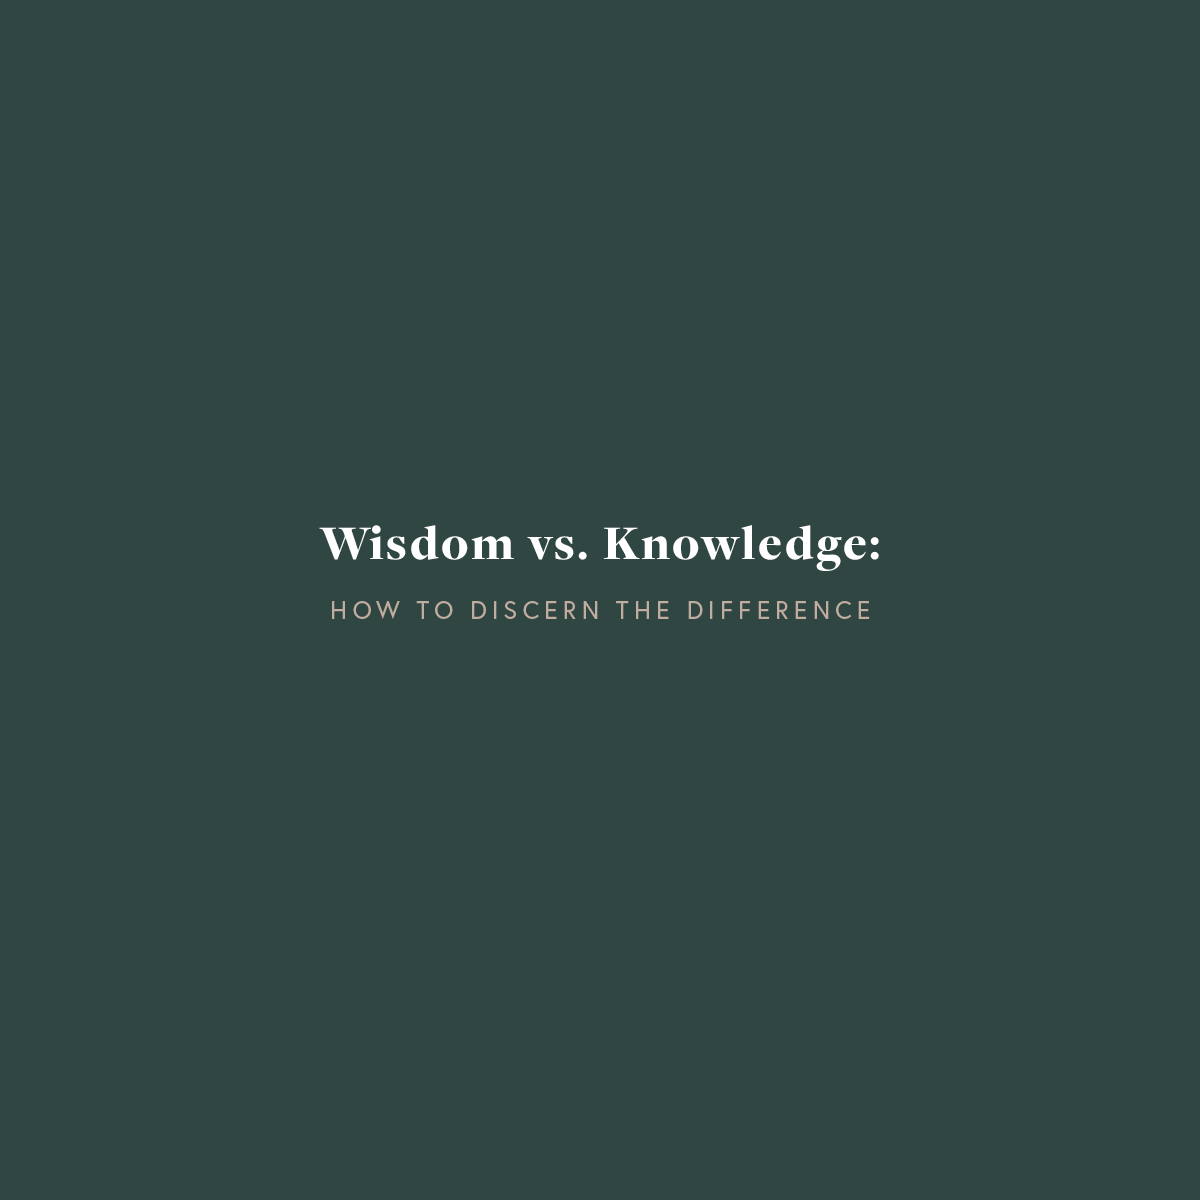 Wisdom vs. Knowledge: How to Discern the Difference